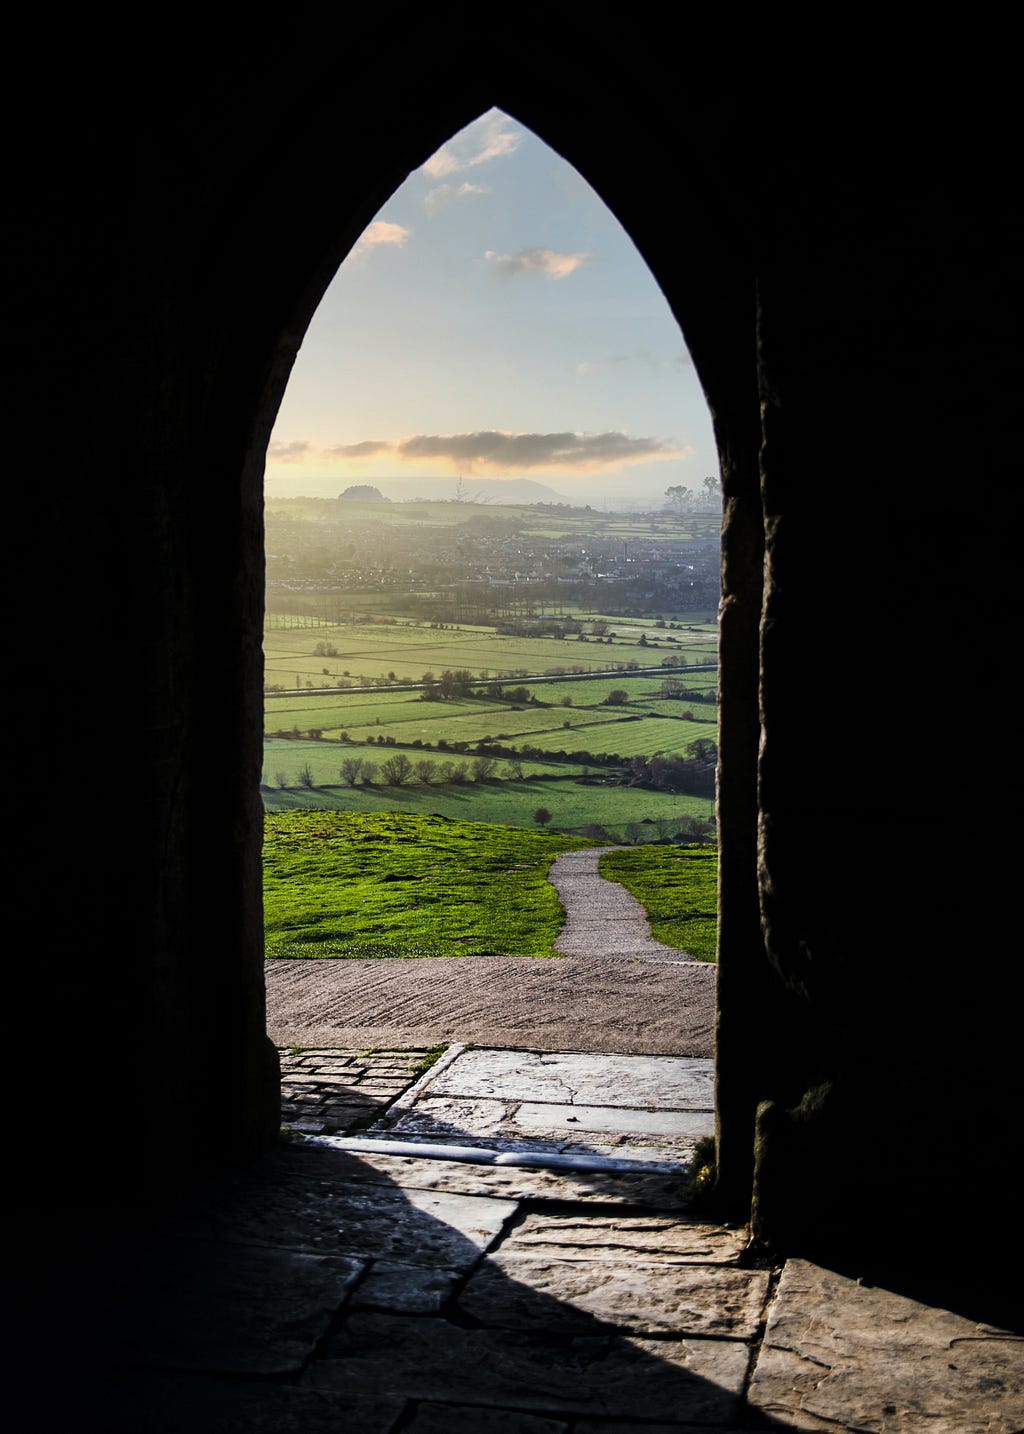 A glorious view of green fields and blue sky with white clouds can be seen through an old, church-style stone window frame.